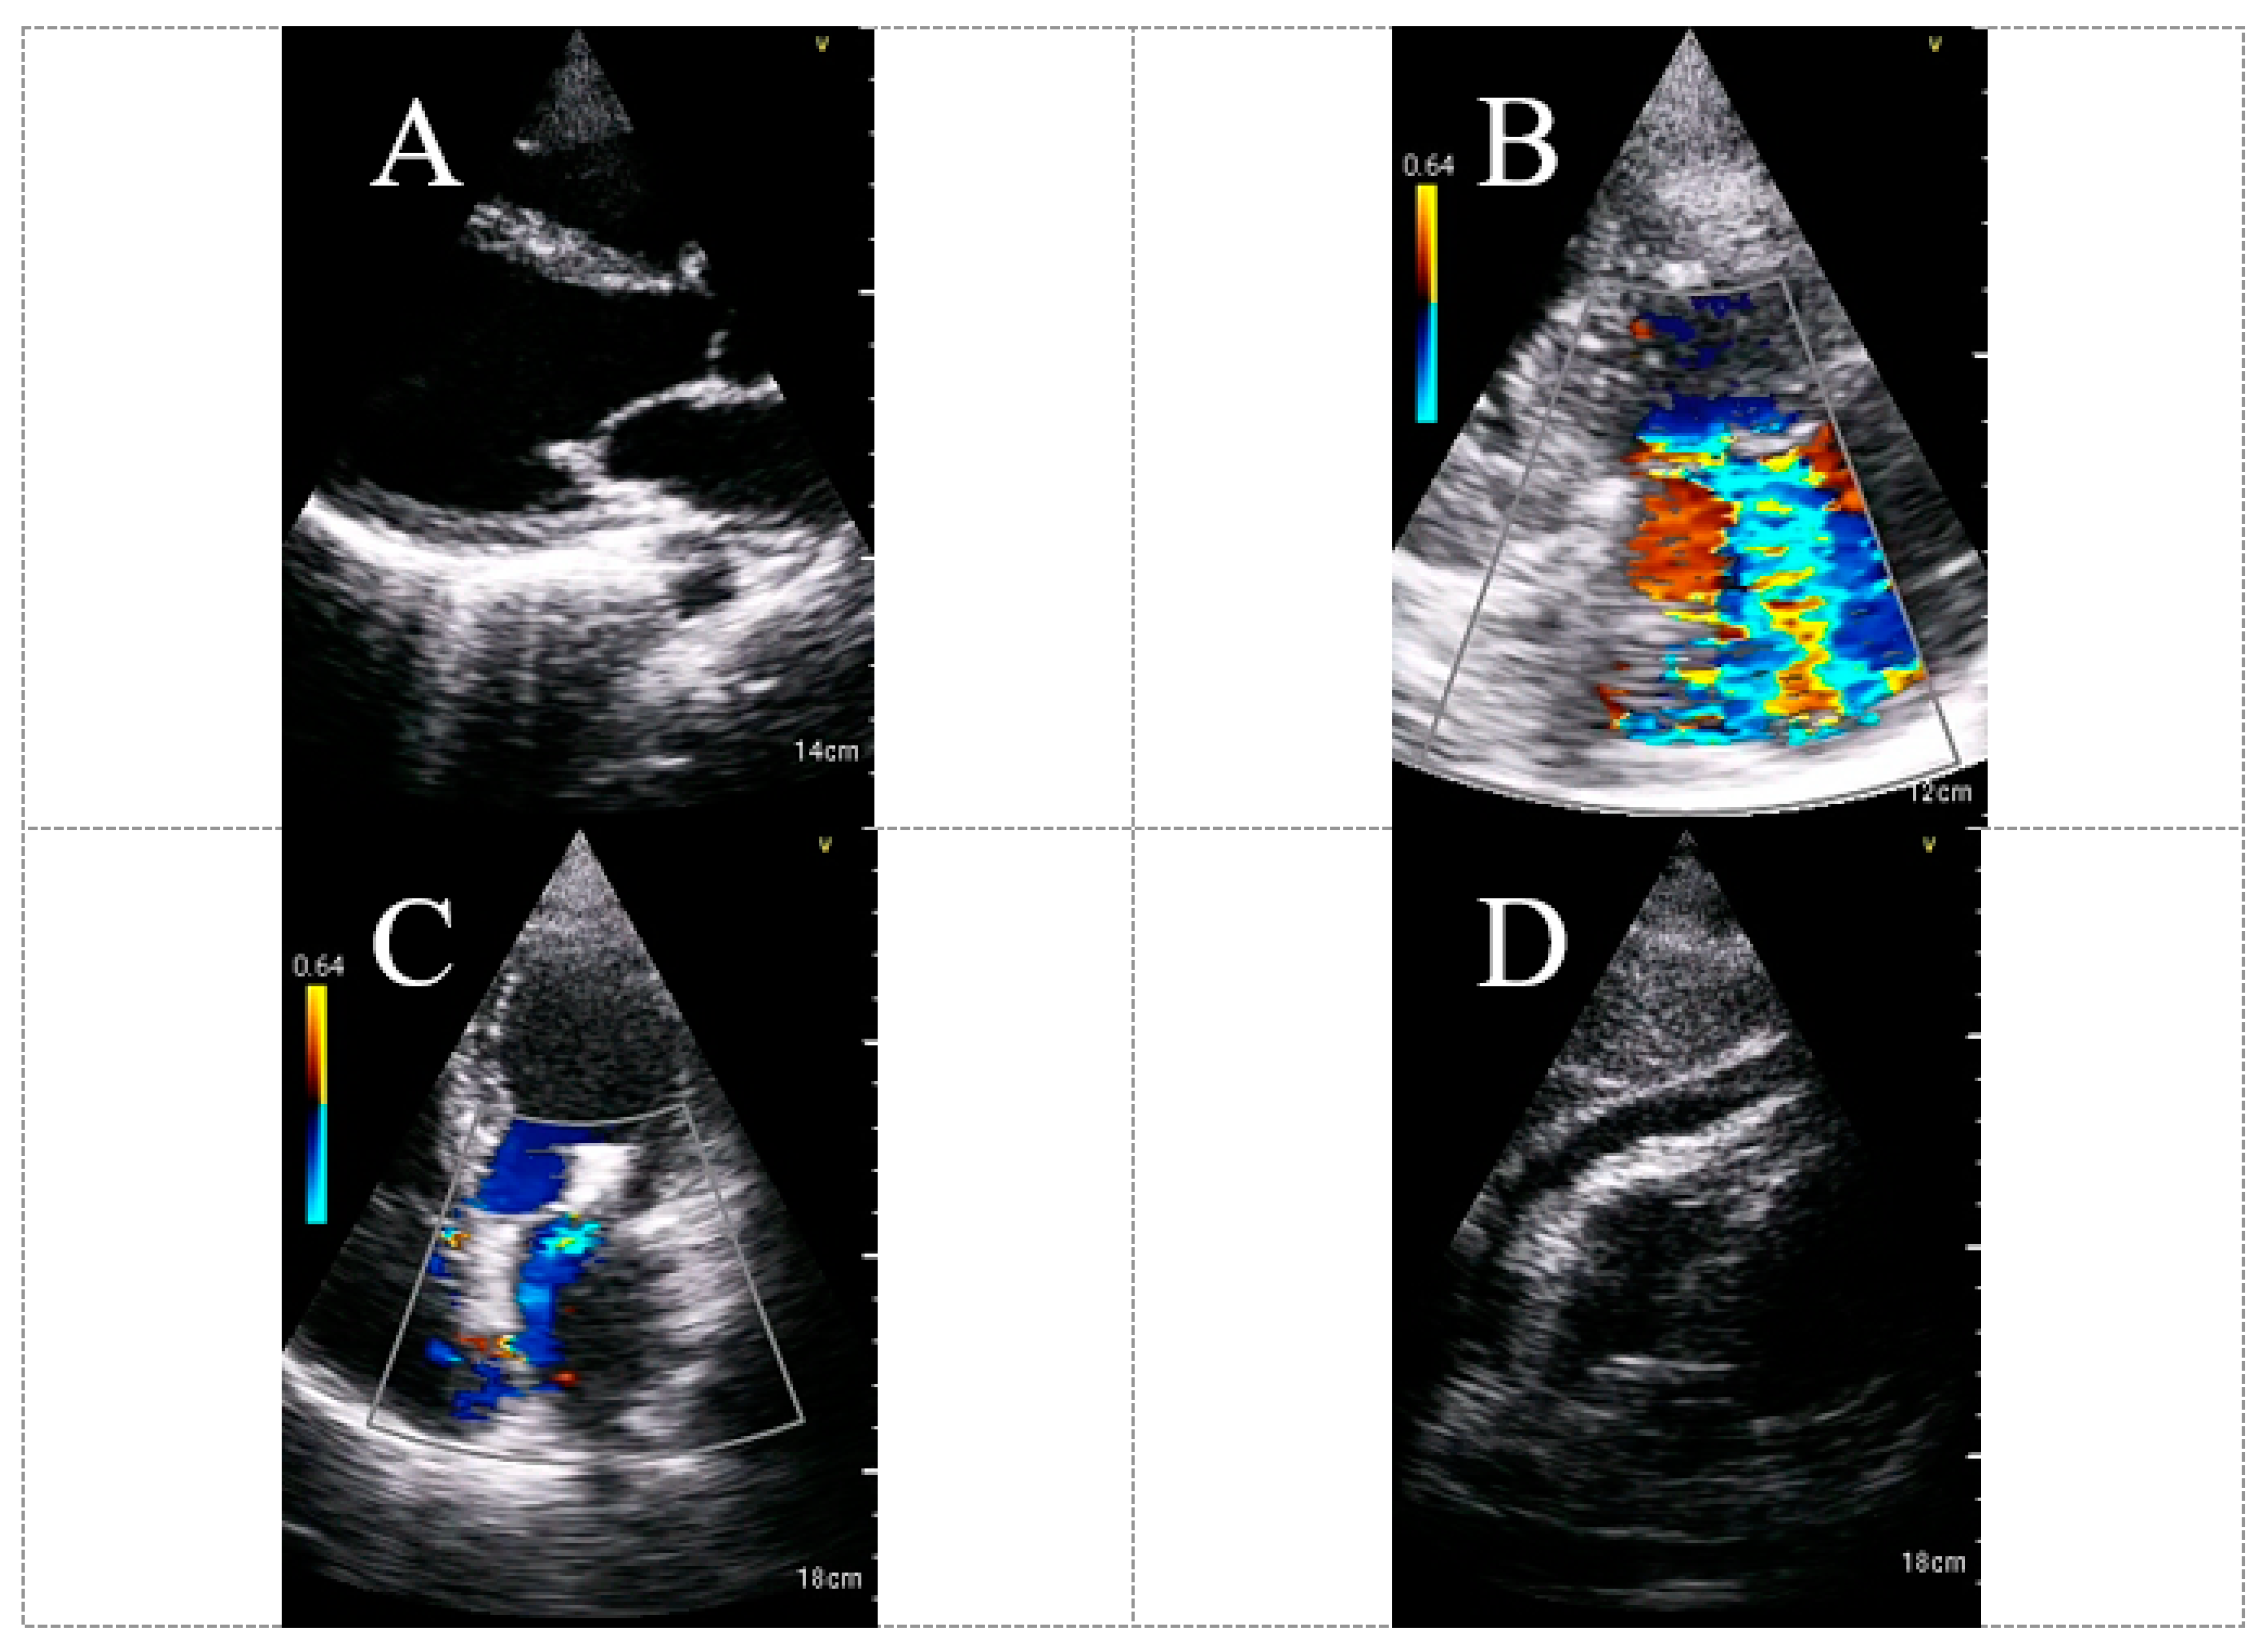 Could strain echocardiography help to assess systolic function in  critically ill COVID-19 patients?